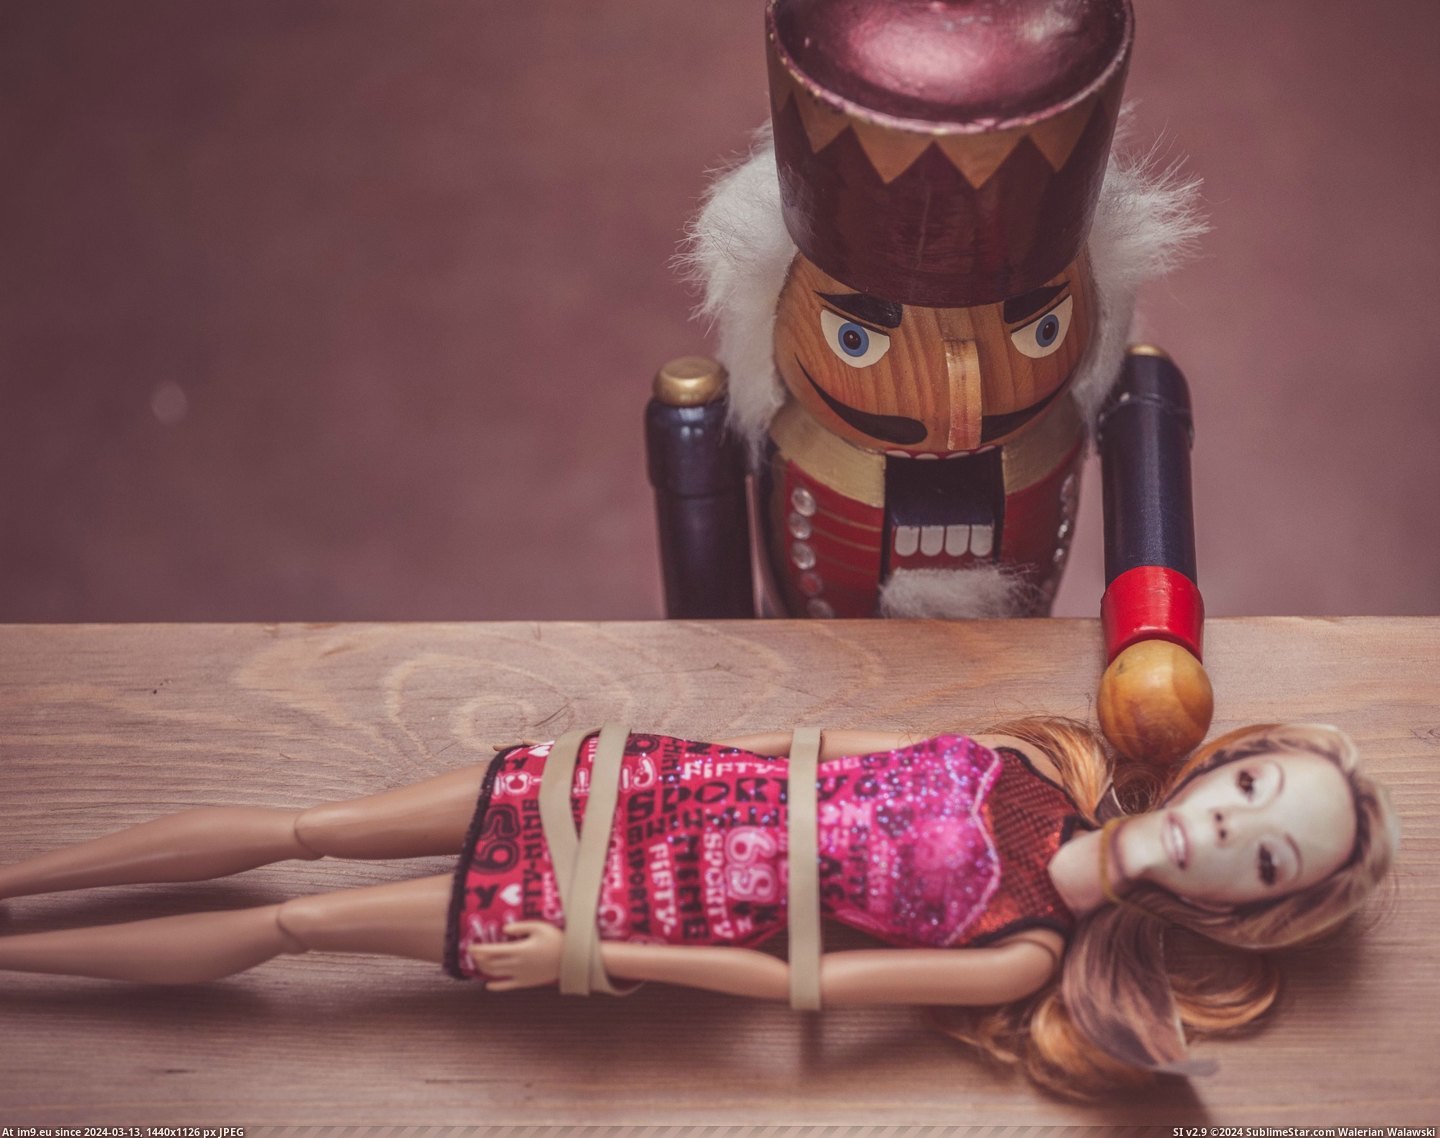 #For #Year #Friend #Stole #Nutcracker #Amazing #Christmas #Got [Pics] Last Christmas I stole my friend's nutcracker - this year, he got these back: 'most amazing thing anyone has done for me  Pic. (Obraz z album My r/PICS favs))